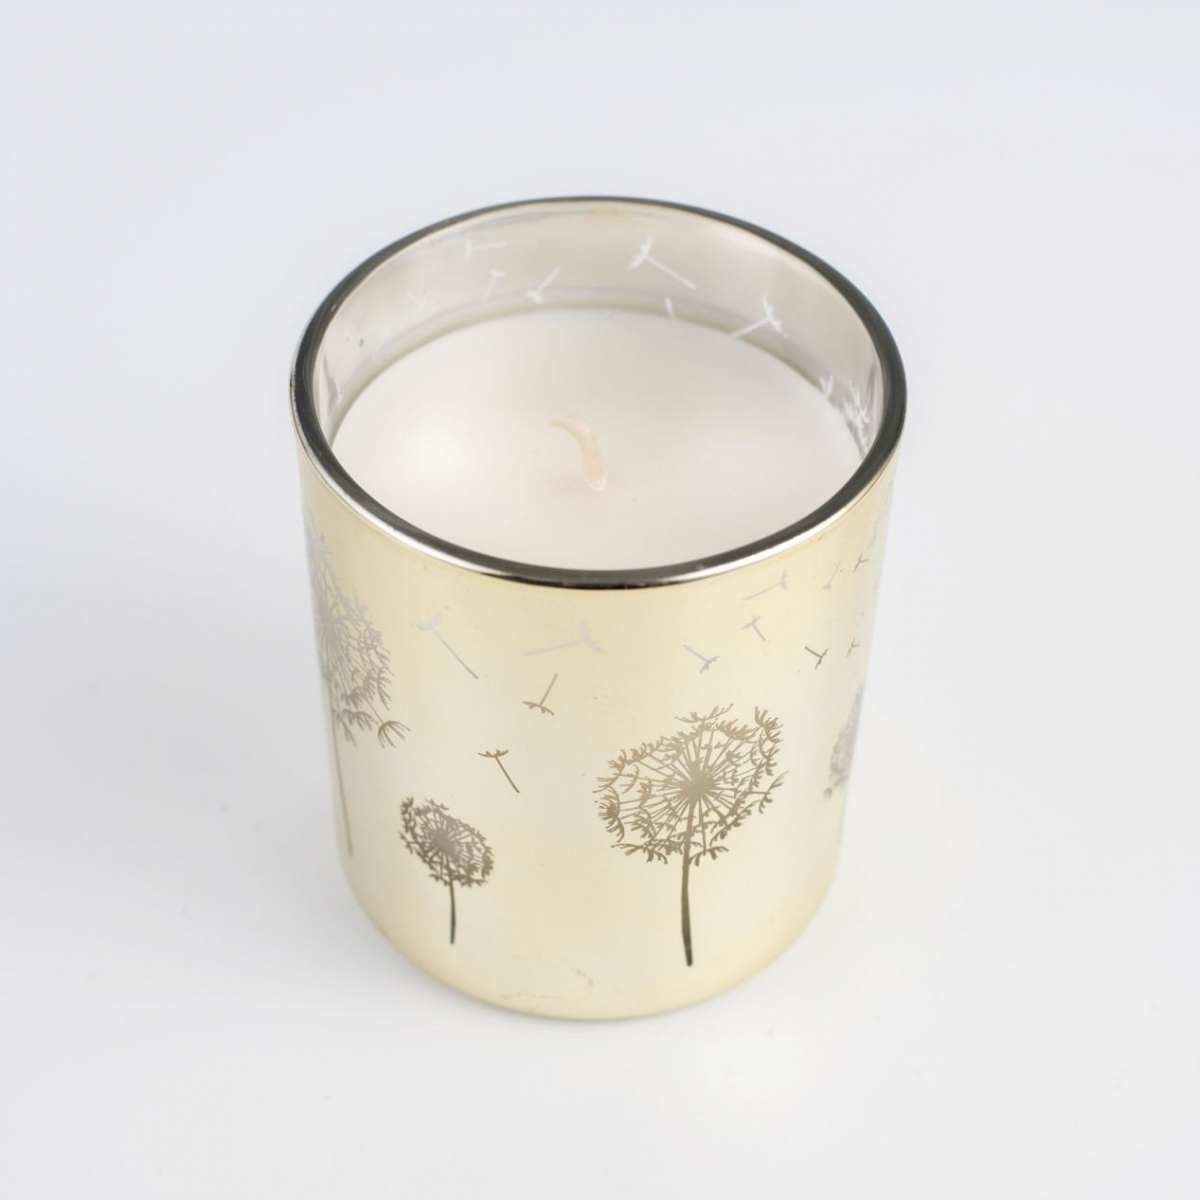 Vegan Candles :  Dandelion ,Engraving On Glass, Gold Candles, China Factory ,Best Price-HOWCANDLE-Candles,Scented Candles,Aromatherapy Candles,Soy Candles,Vegan Candles,Jar Candles,Pillar Candles,Candle Gift Sets,Essential Oils,Reed Diffuser,Candle Holder,